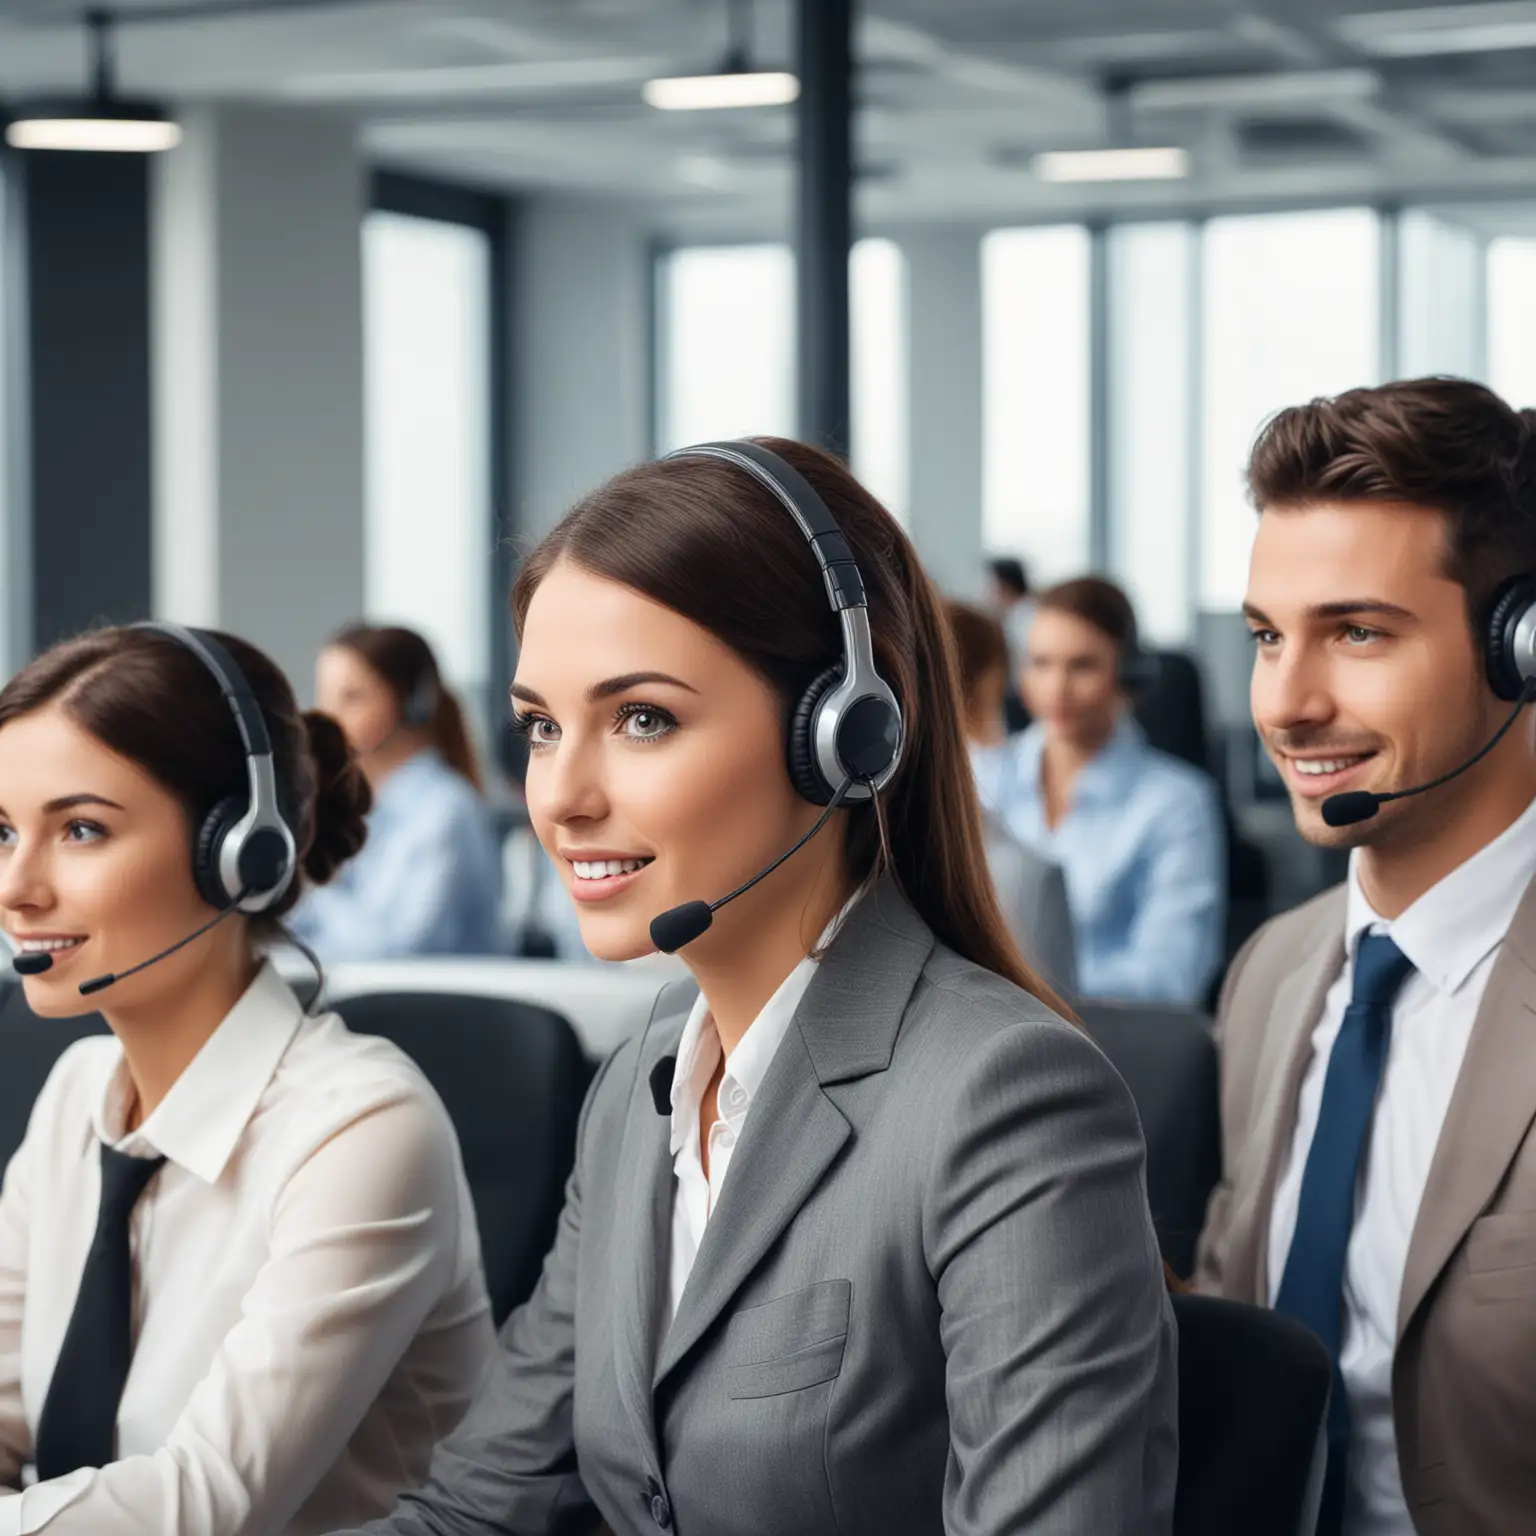 Image of a Modern Contact Center with realistic agents
